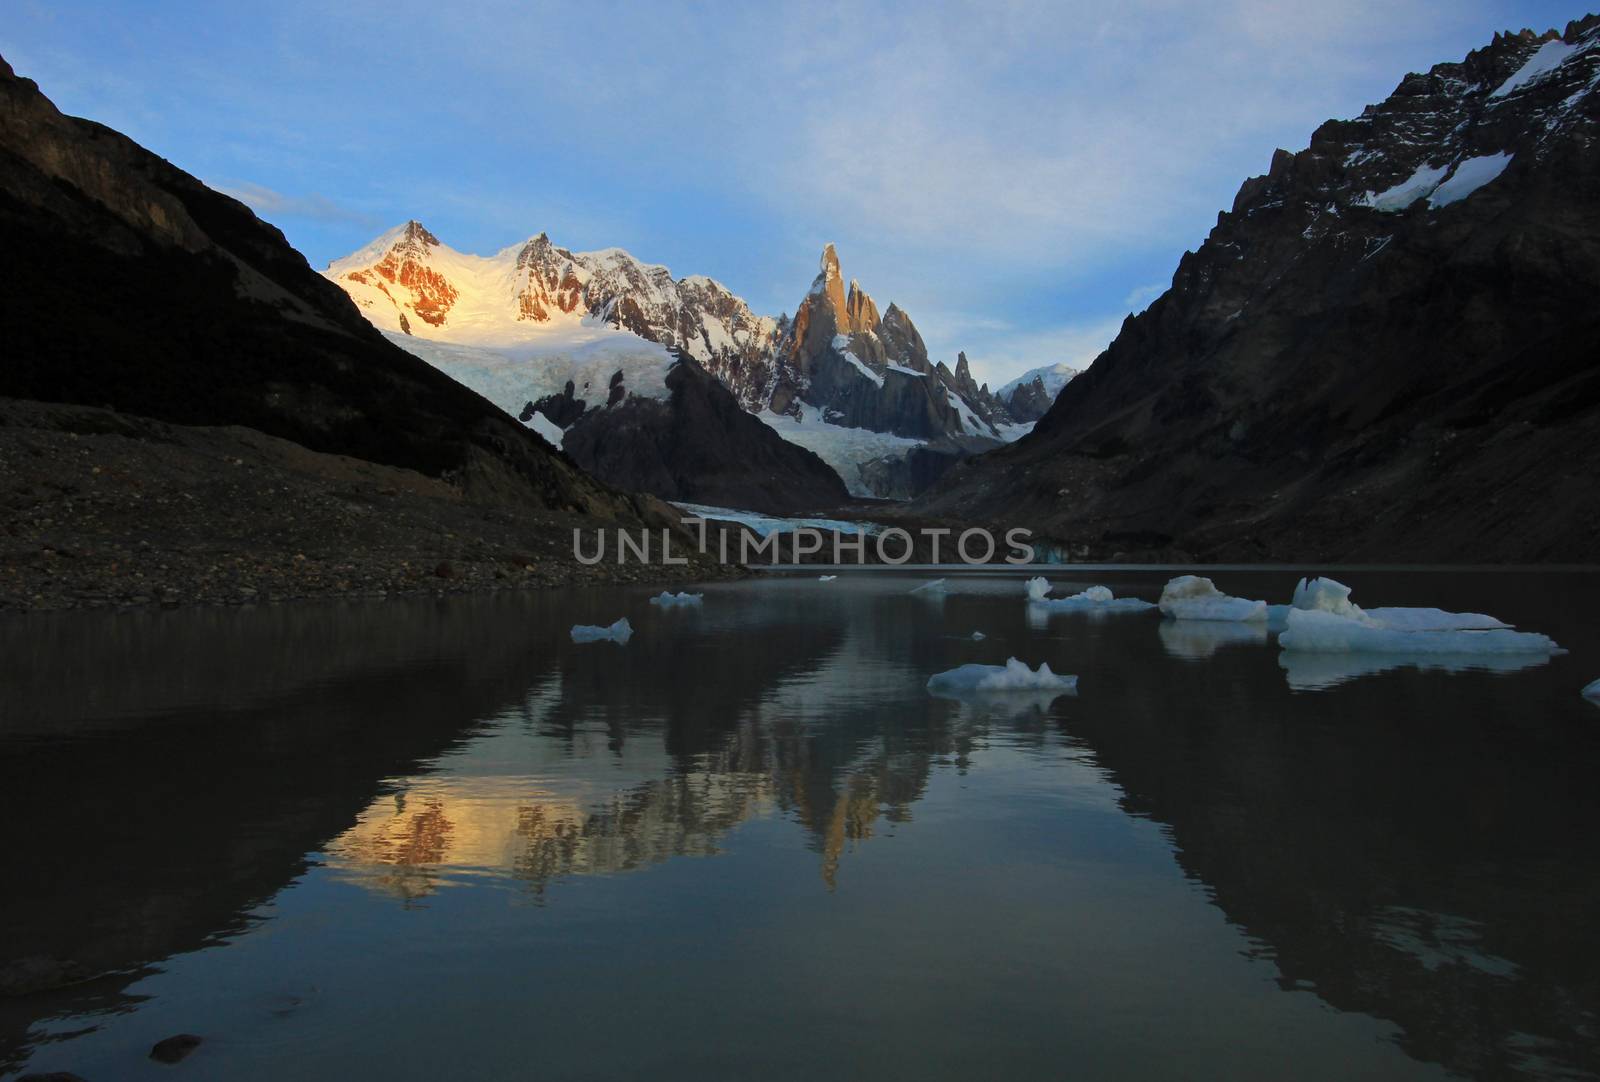 Reflection of Cerro Torre in Laguna Torre, Patagonia, Argentina by cicloco